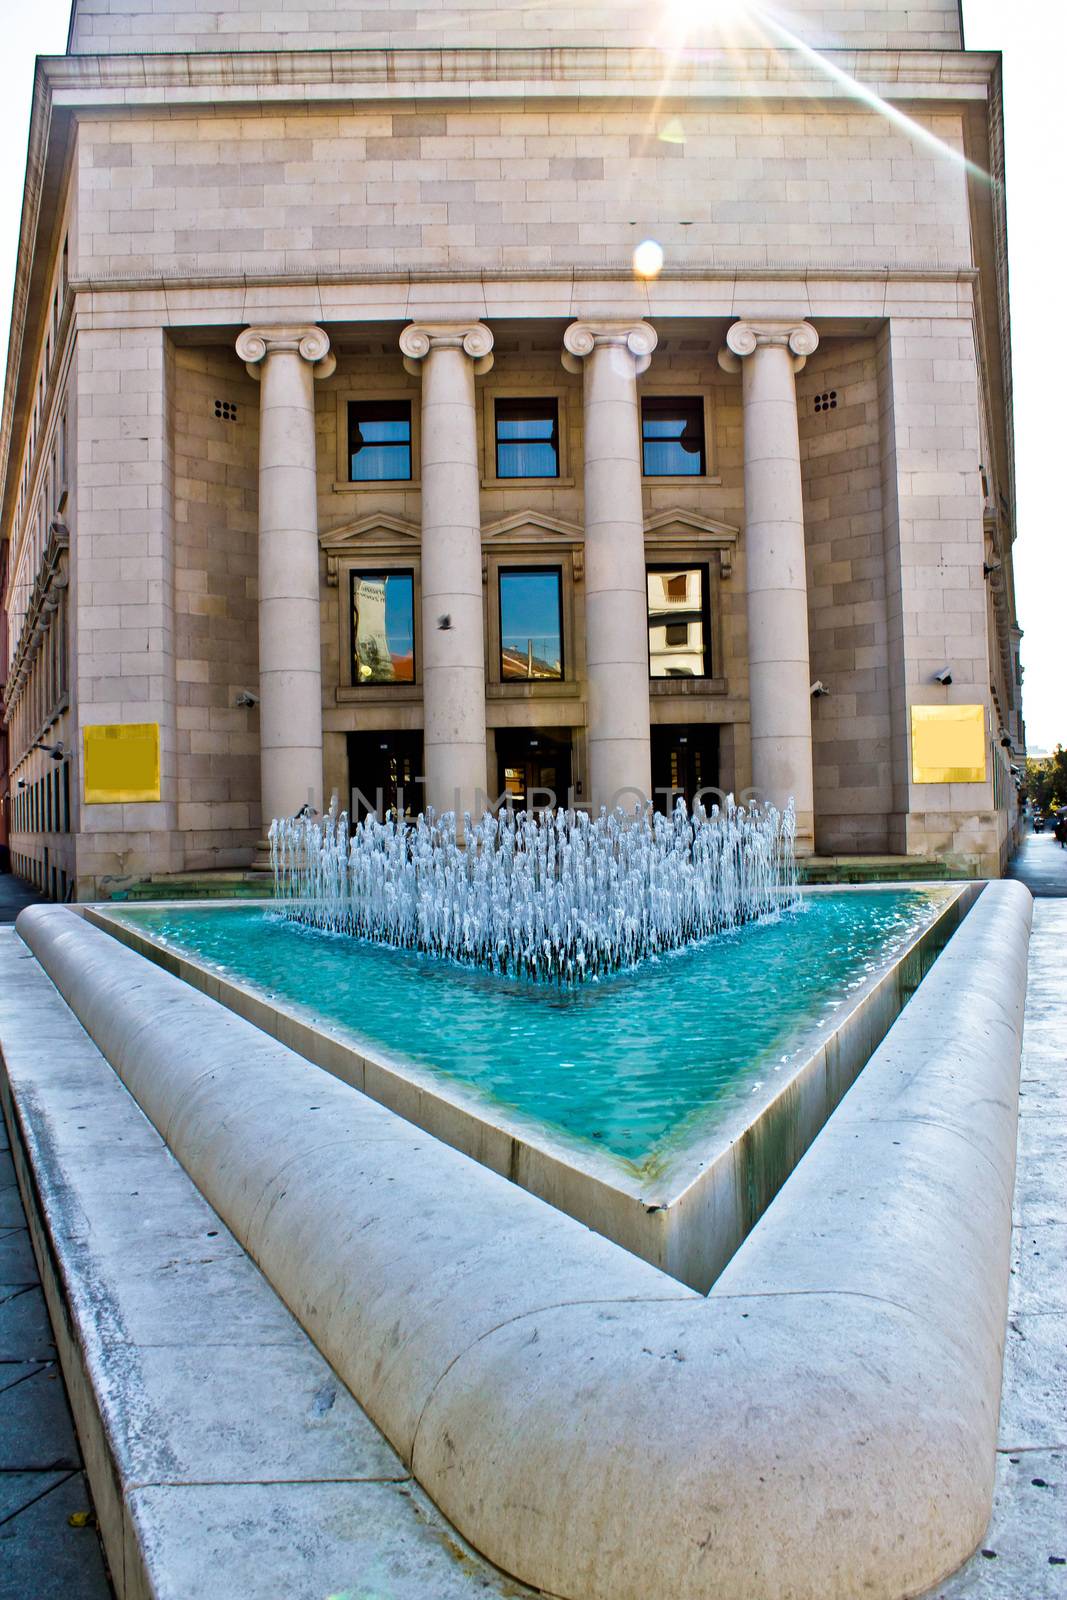 Croatian national bank building and fountain by xbrchx